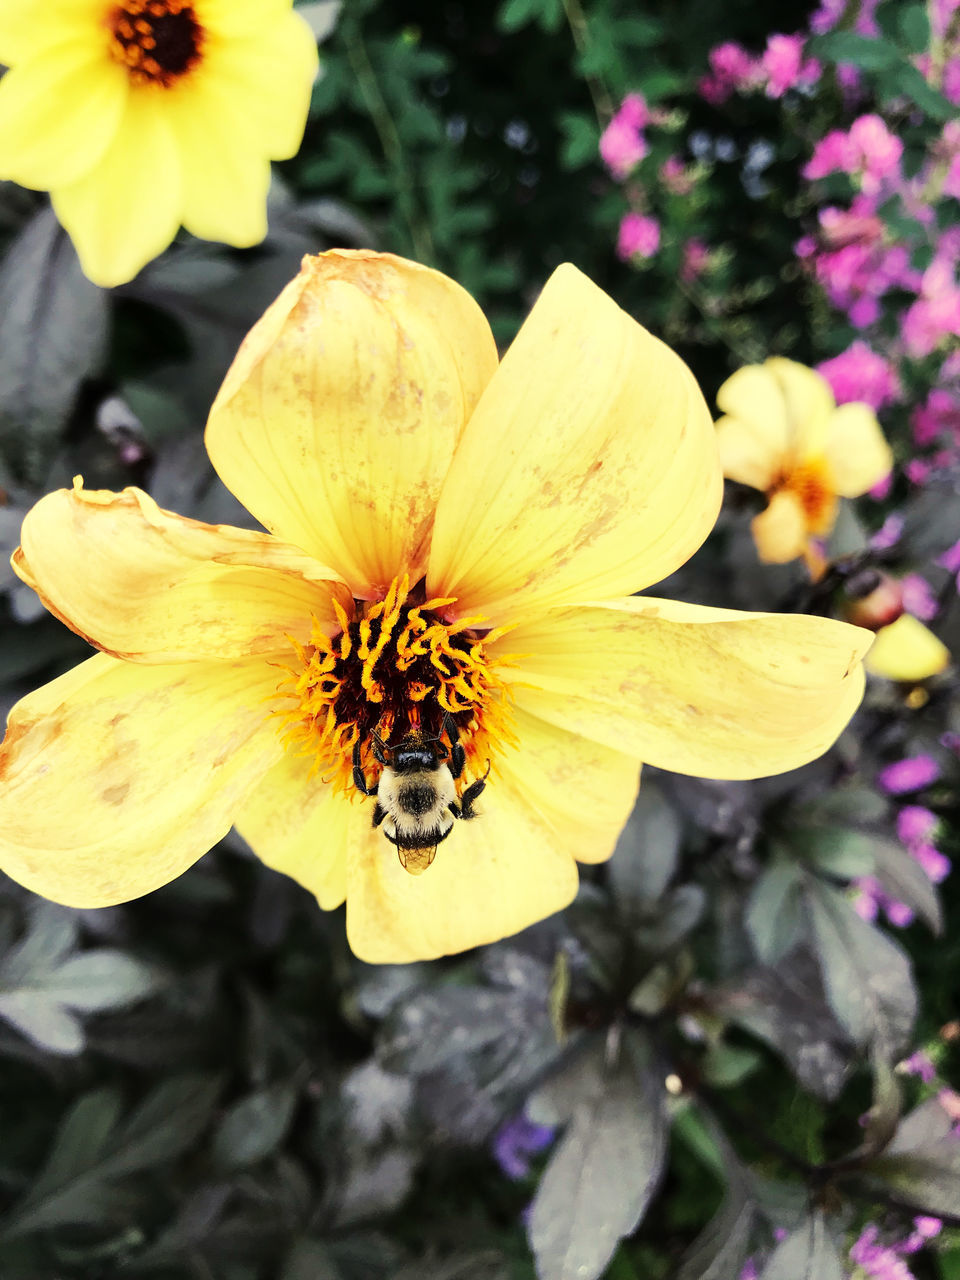 CLOSE-UP OF BEE POLLINATING ON YELLOW FLOWERING PLANT